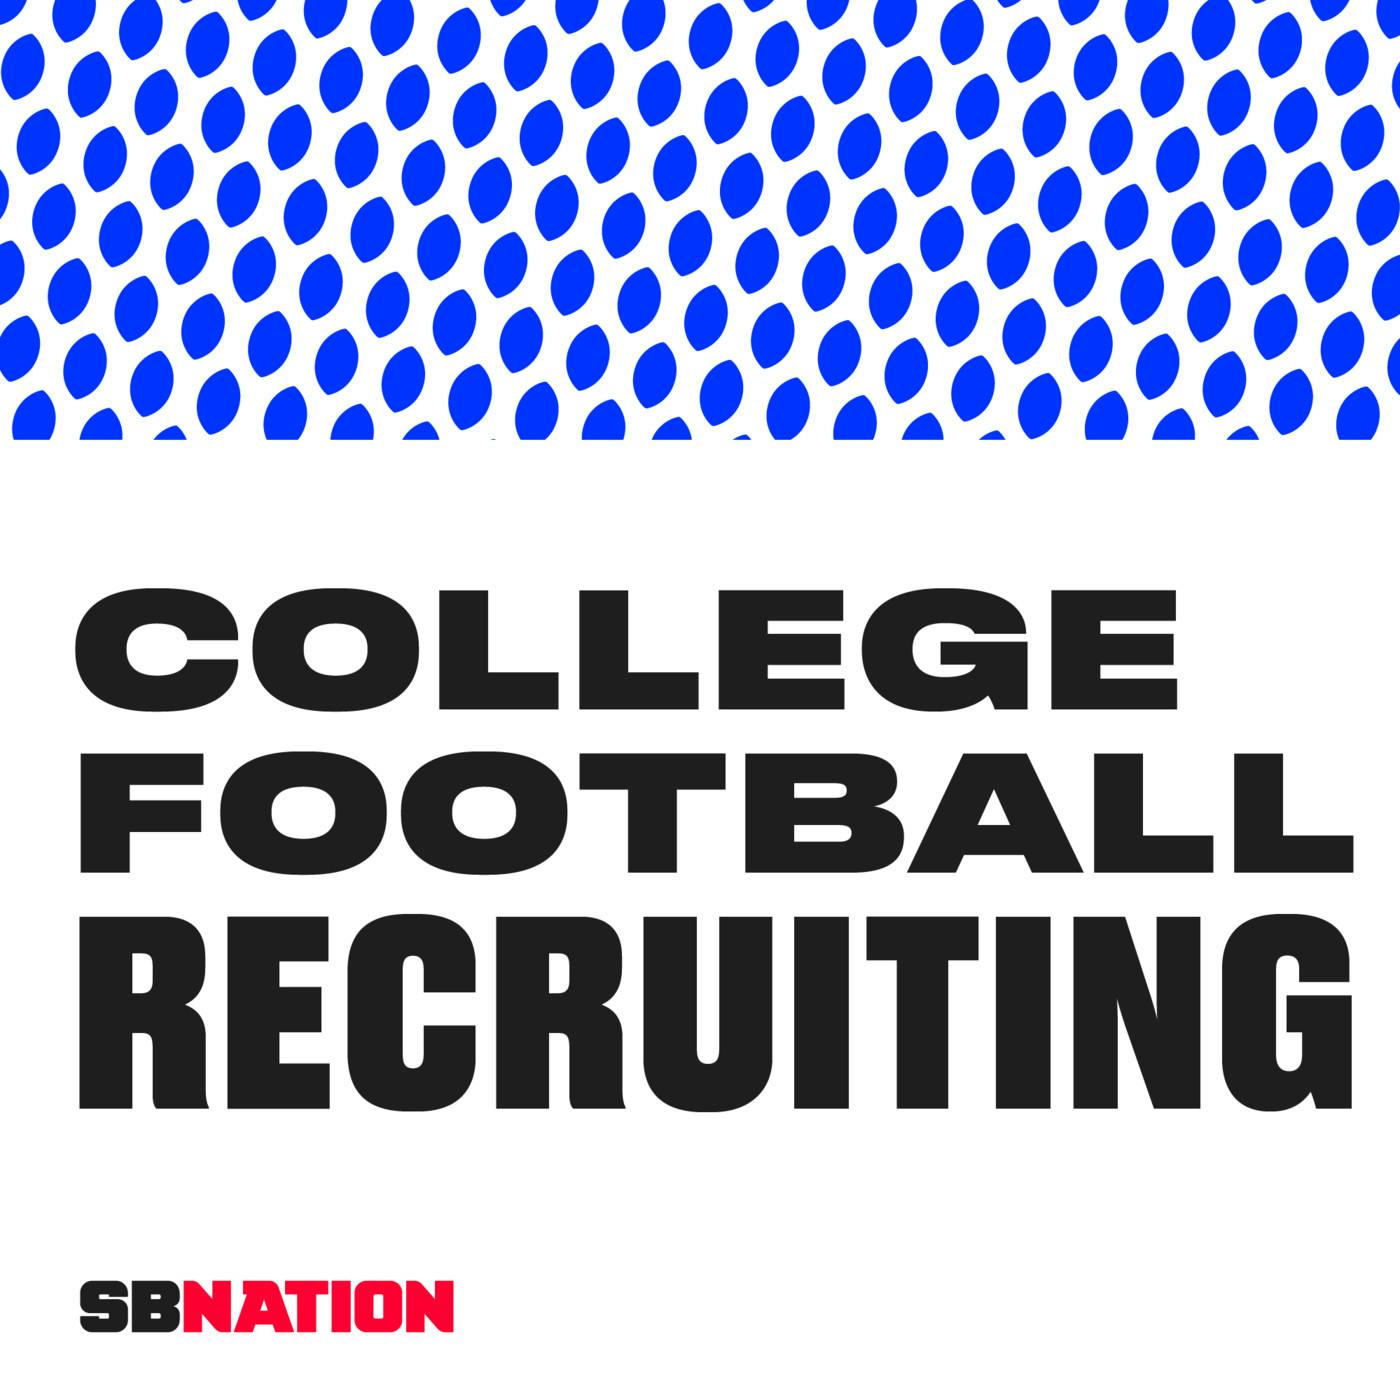 Maximizing resources in college football recruiting